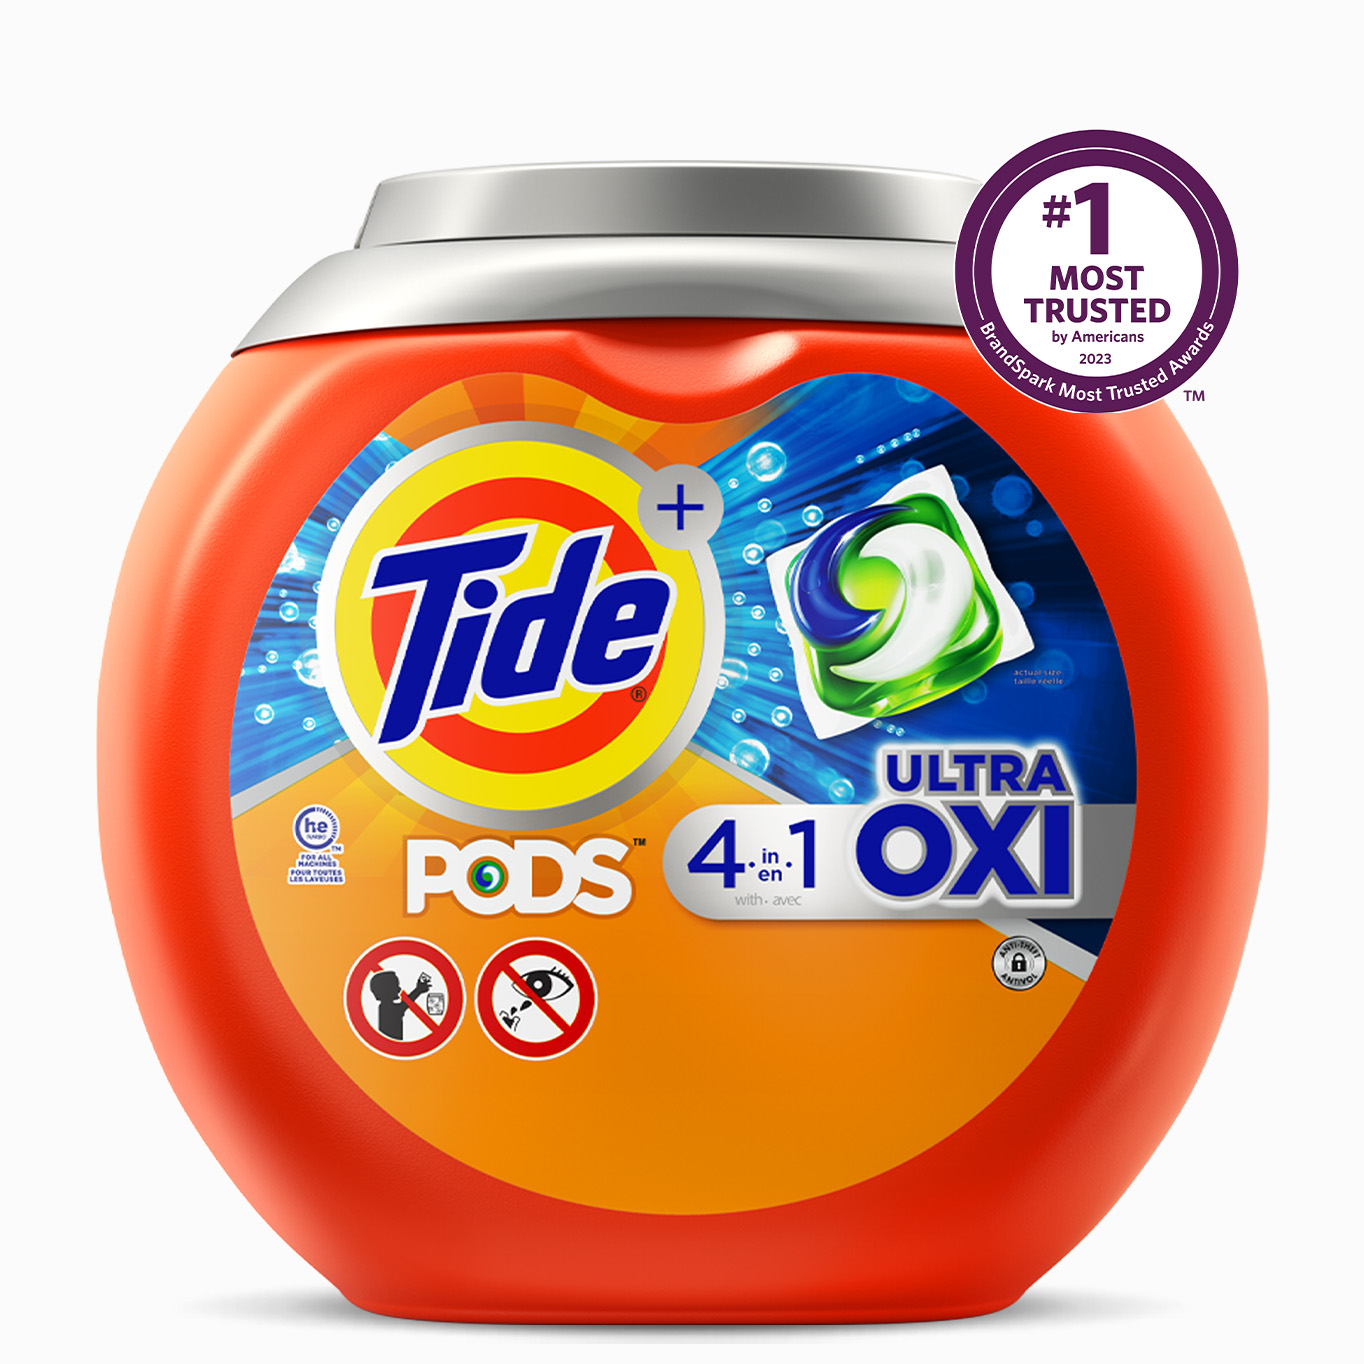 Tide PODS Ultra OXI 4in1 Laundry Detergent